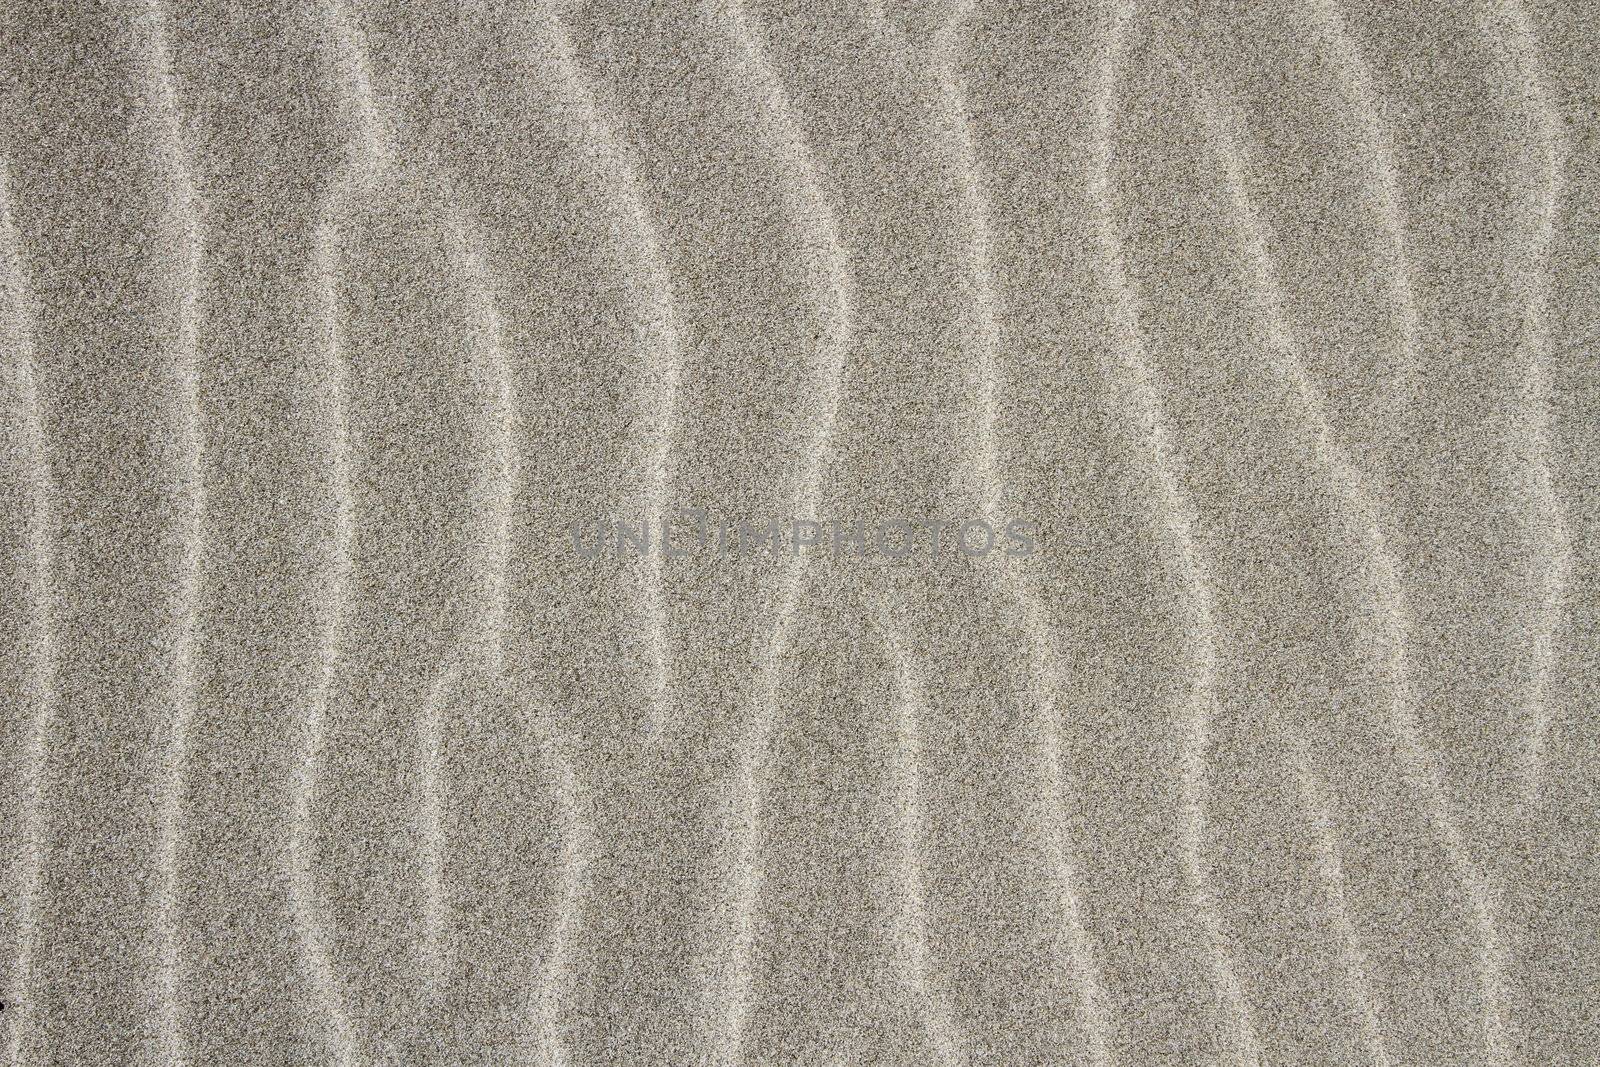 Sand background by Elenaphotos21